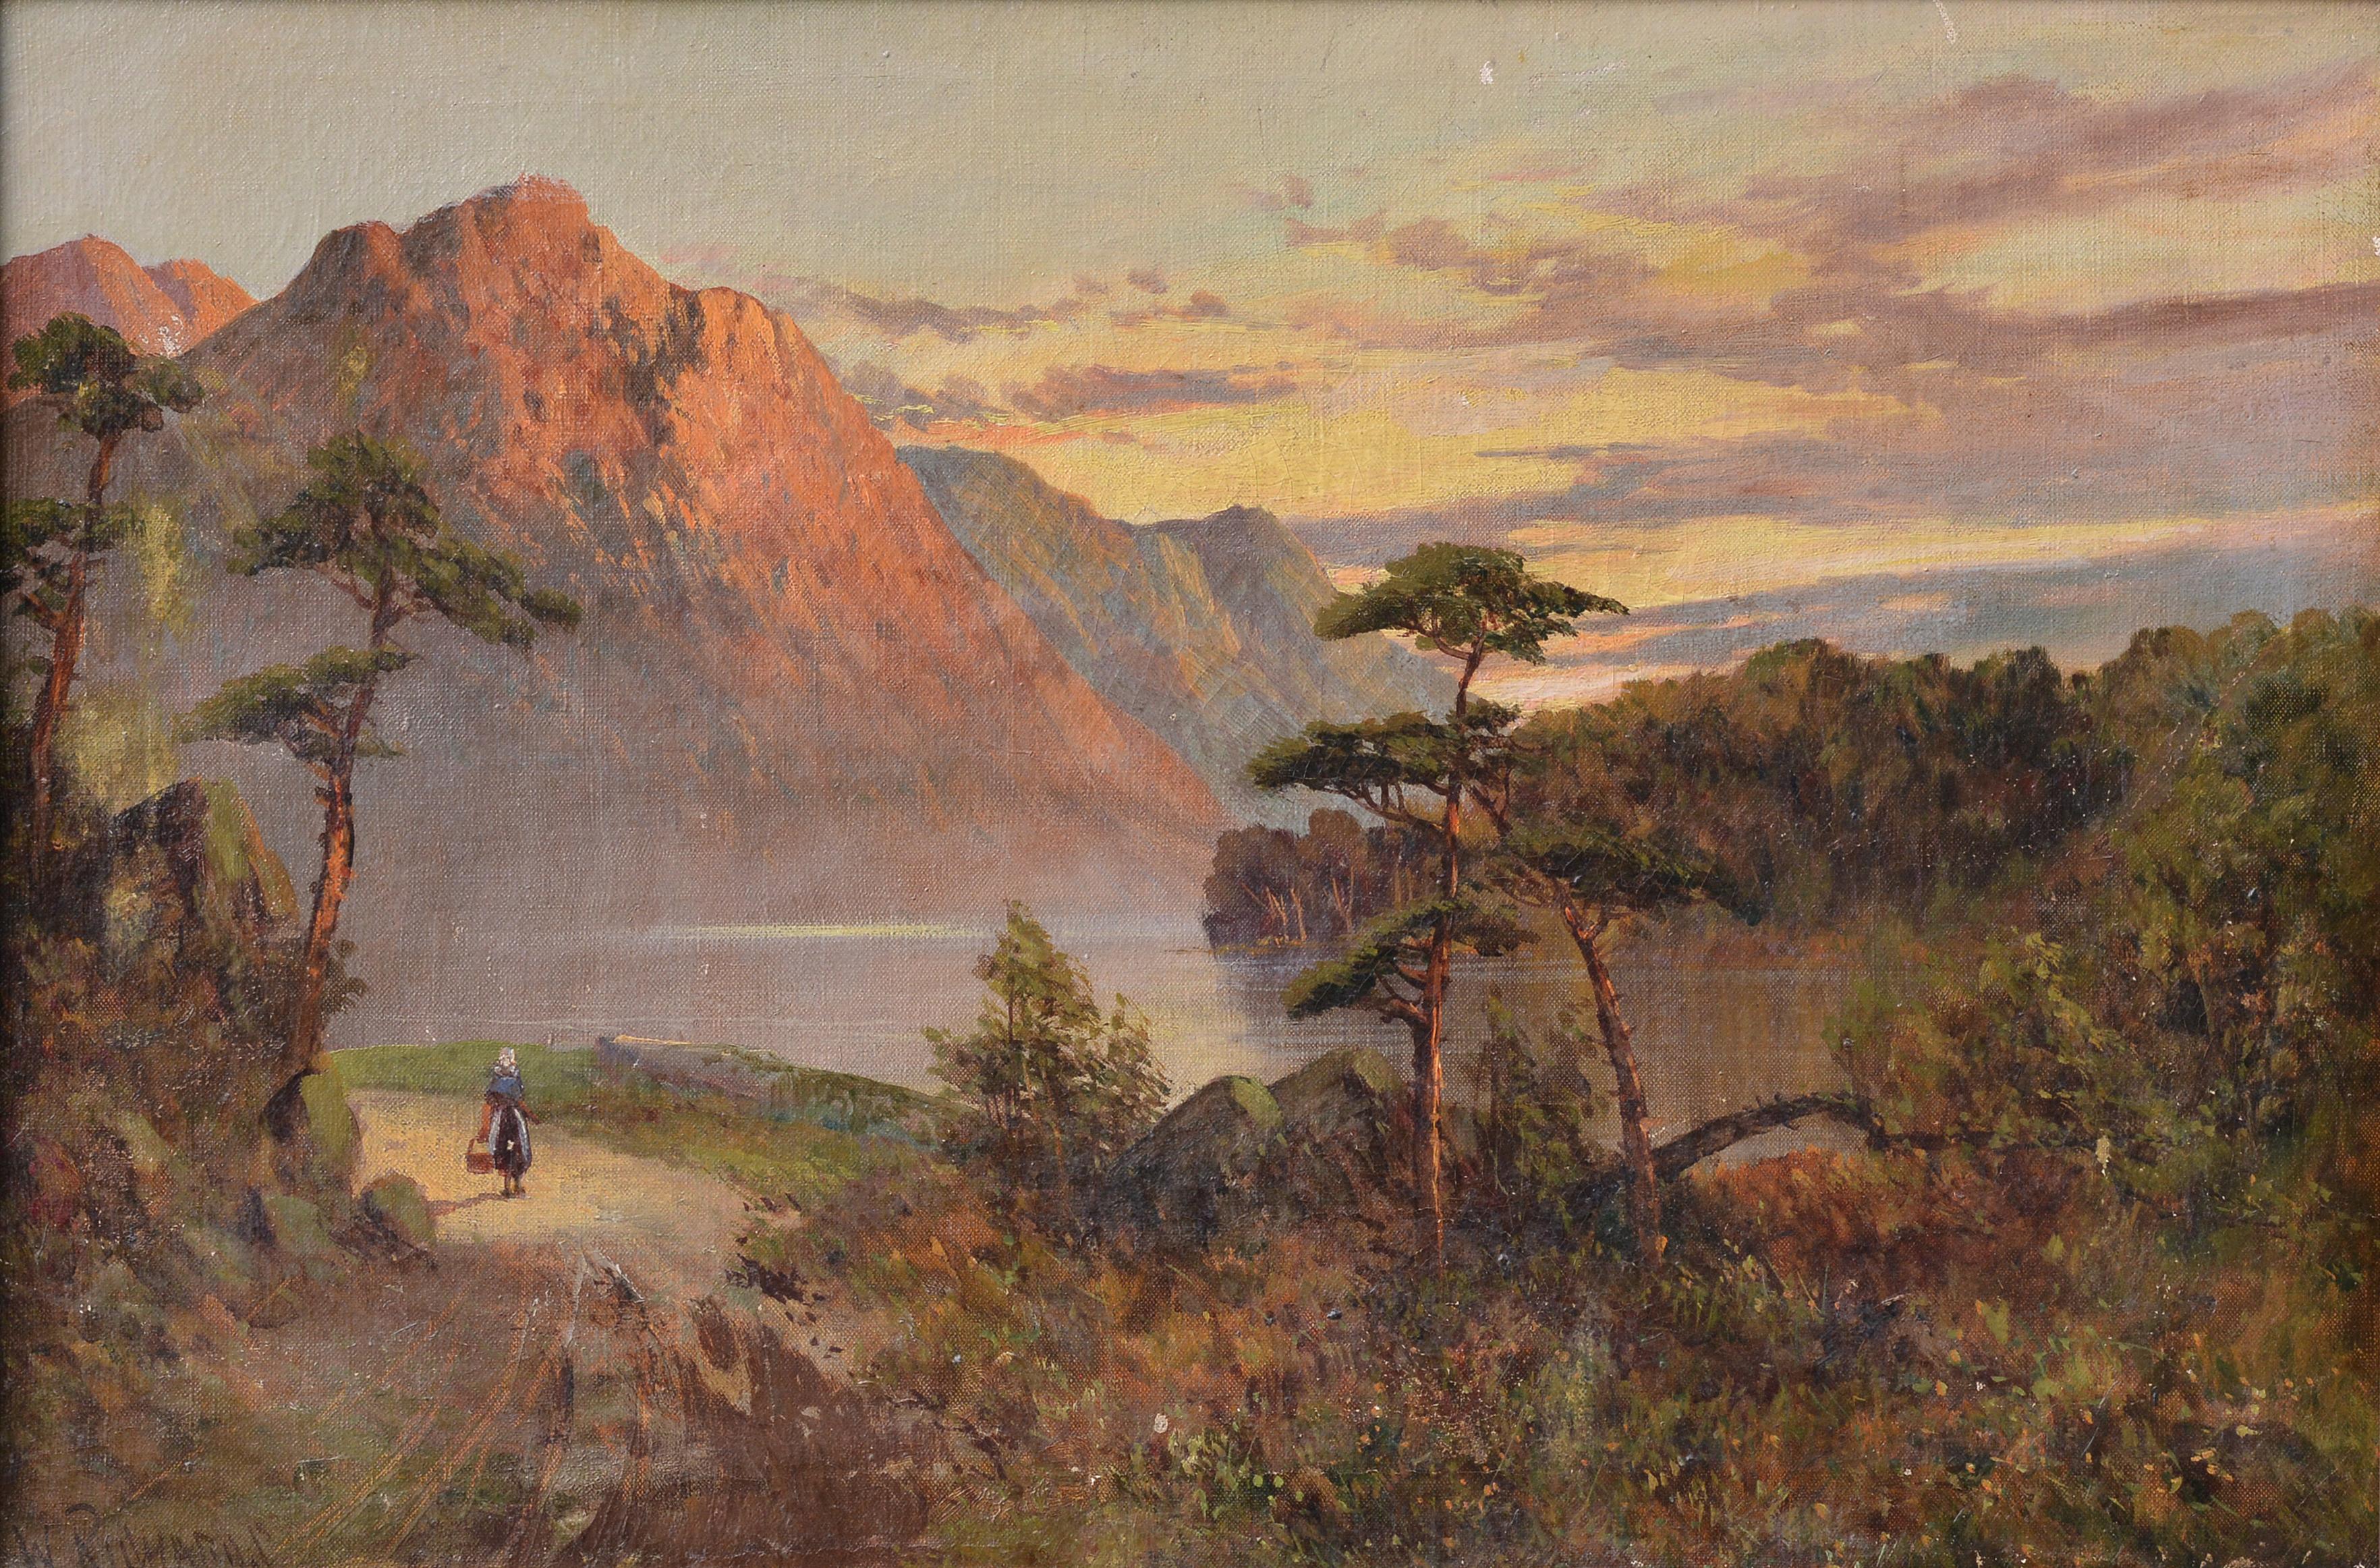 Lakeland scene - stunning example of late British Romanticism, with the vibrant colors of the sunset reflected on the mountain ridges and the calm waters of the loch. The artist perfectly conveyed the atmosphere of the moment: the rays of the